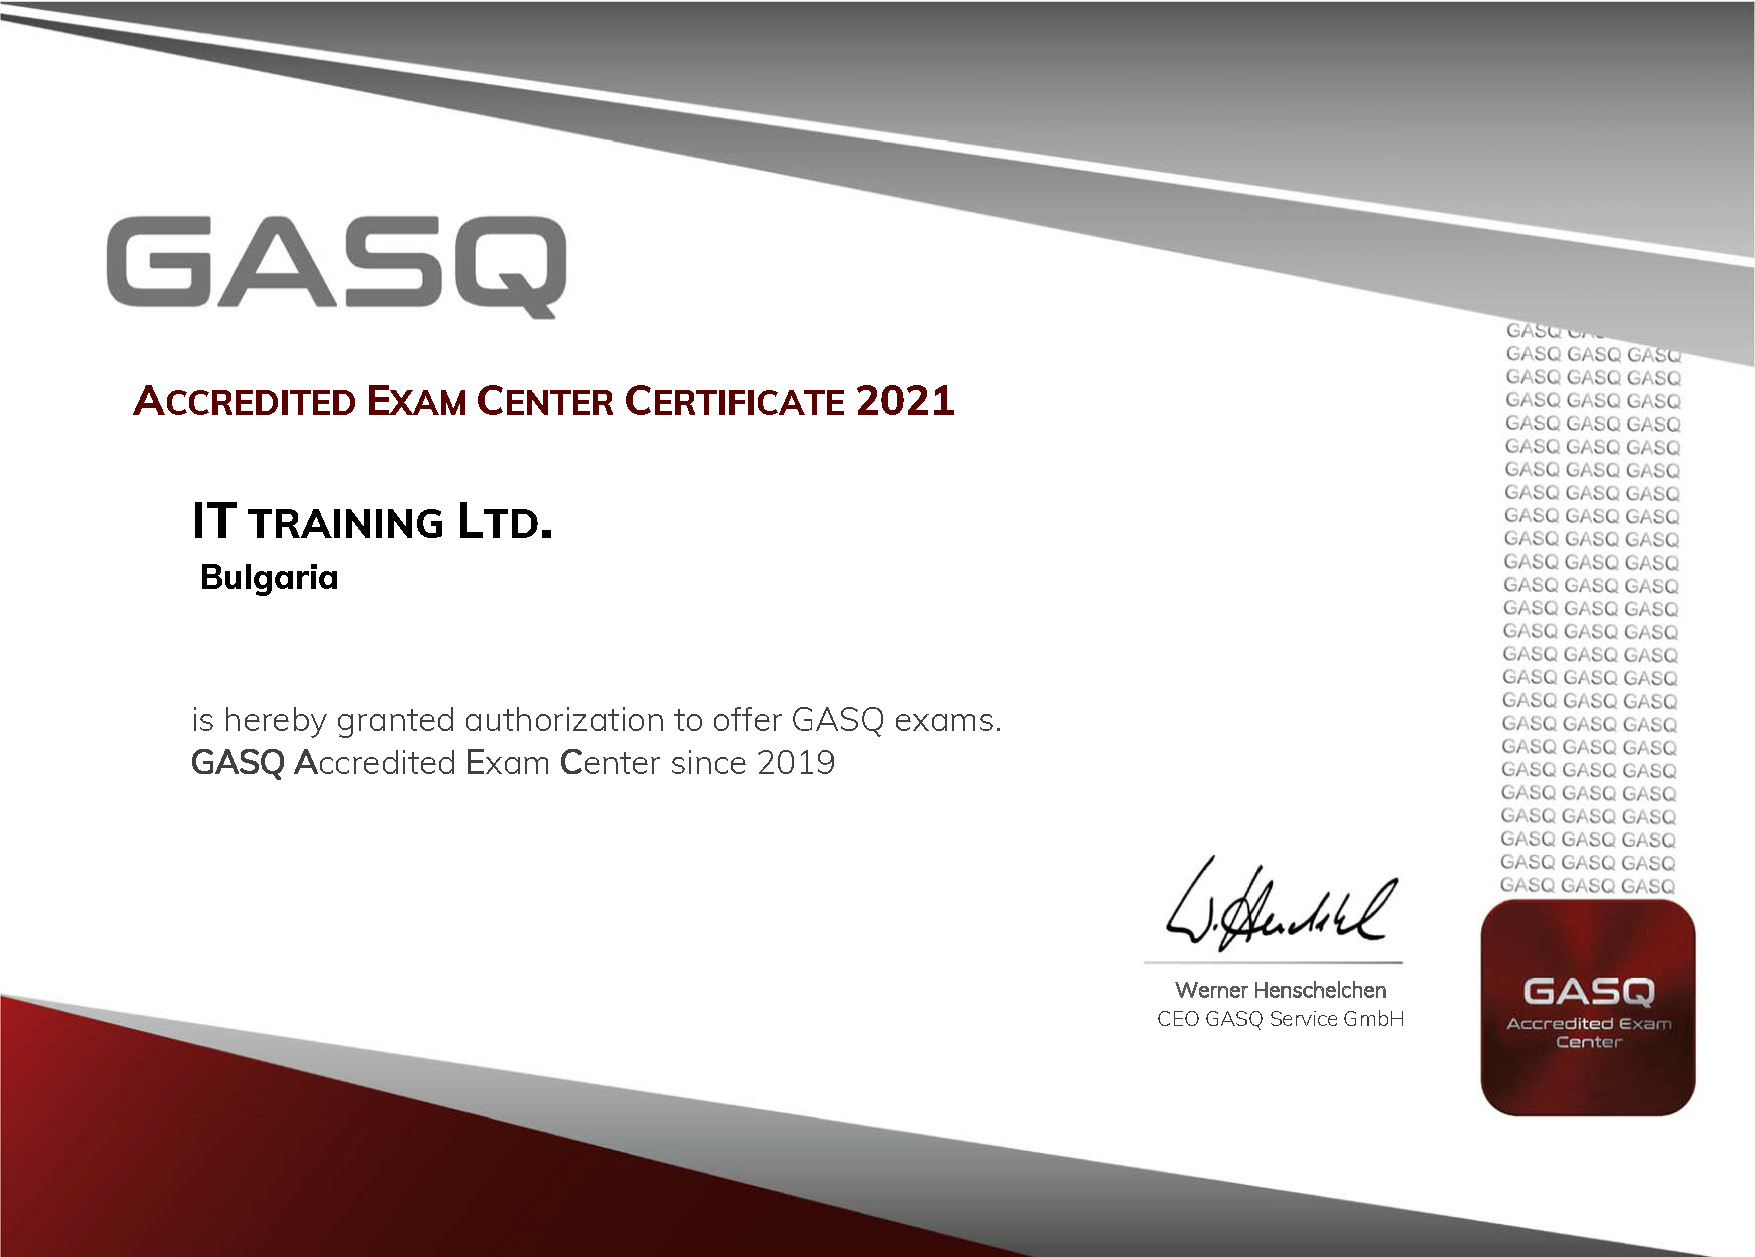 ISTQB Test Center for 2021 (Acredited by GASQ)